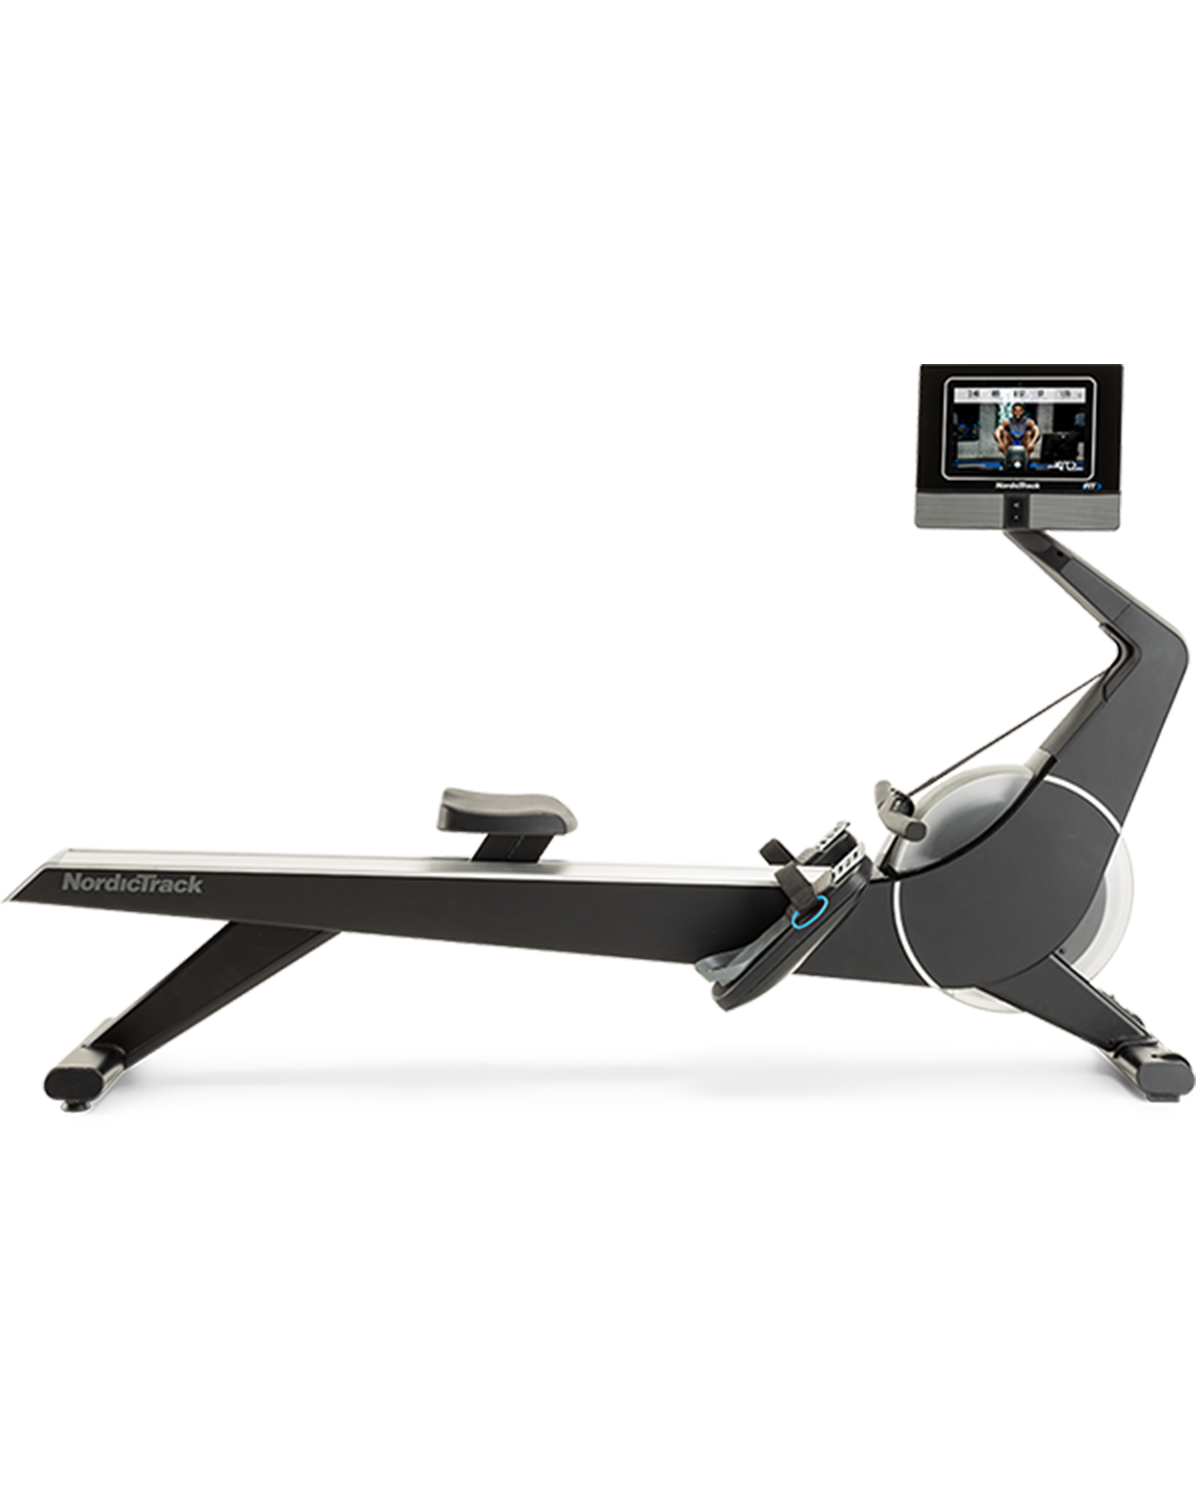 NordicTrack NEW RW700 Rower Best of Rowers 